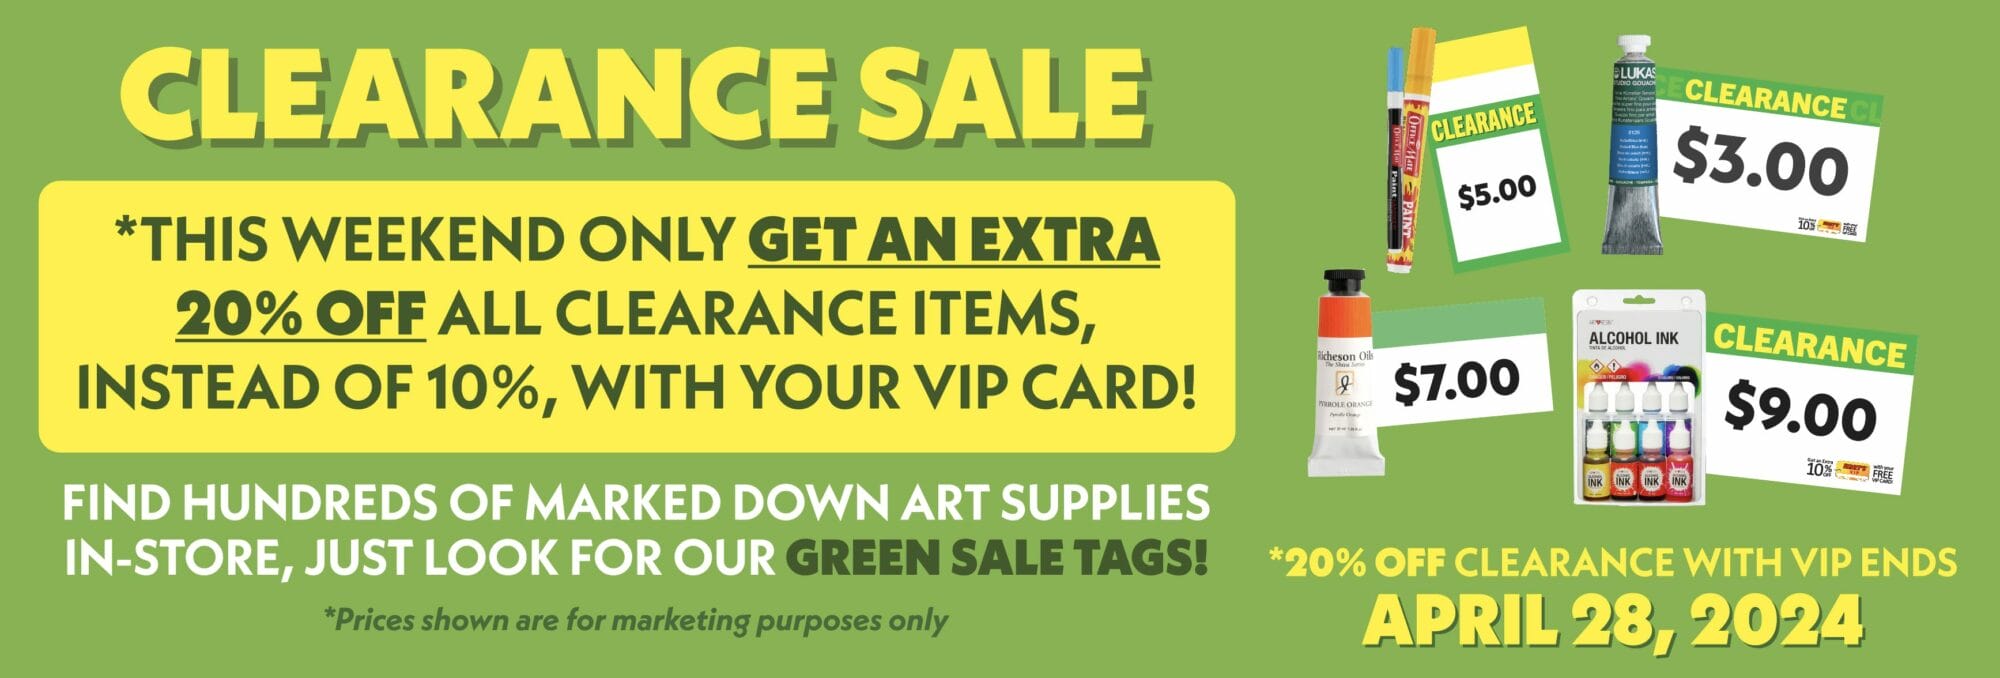 Jerry's Artarama Retail Stores - Your Local Art Supply Store